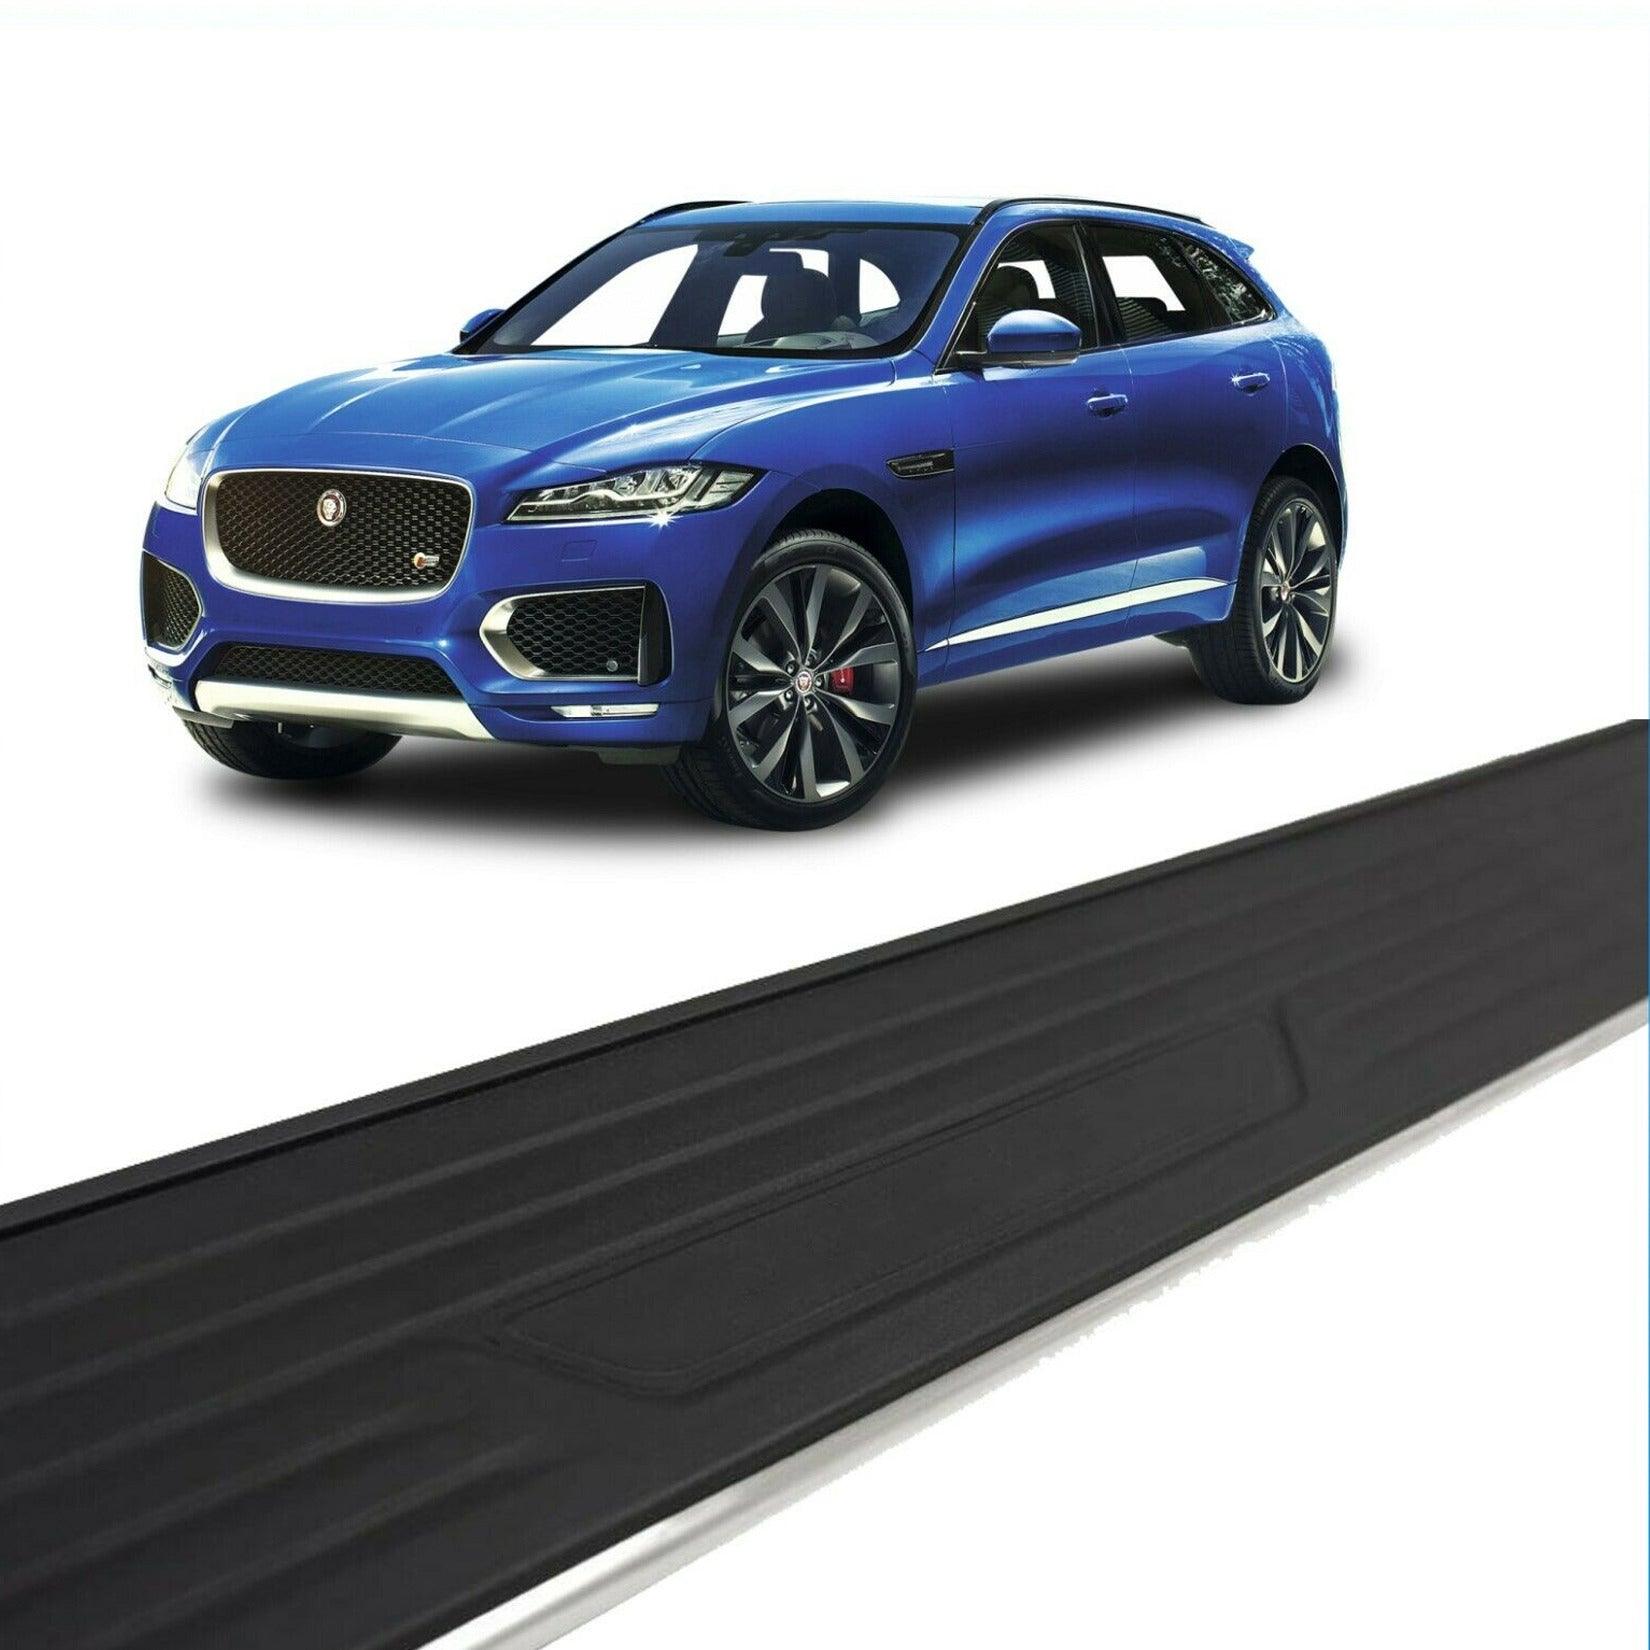 JAGUAR F PACE OEM STYLE RUNNING BOARDS - SIDE STEPS - PAIR - Storm Xccessories2